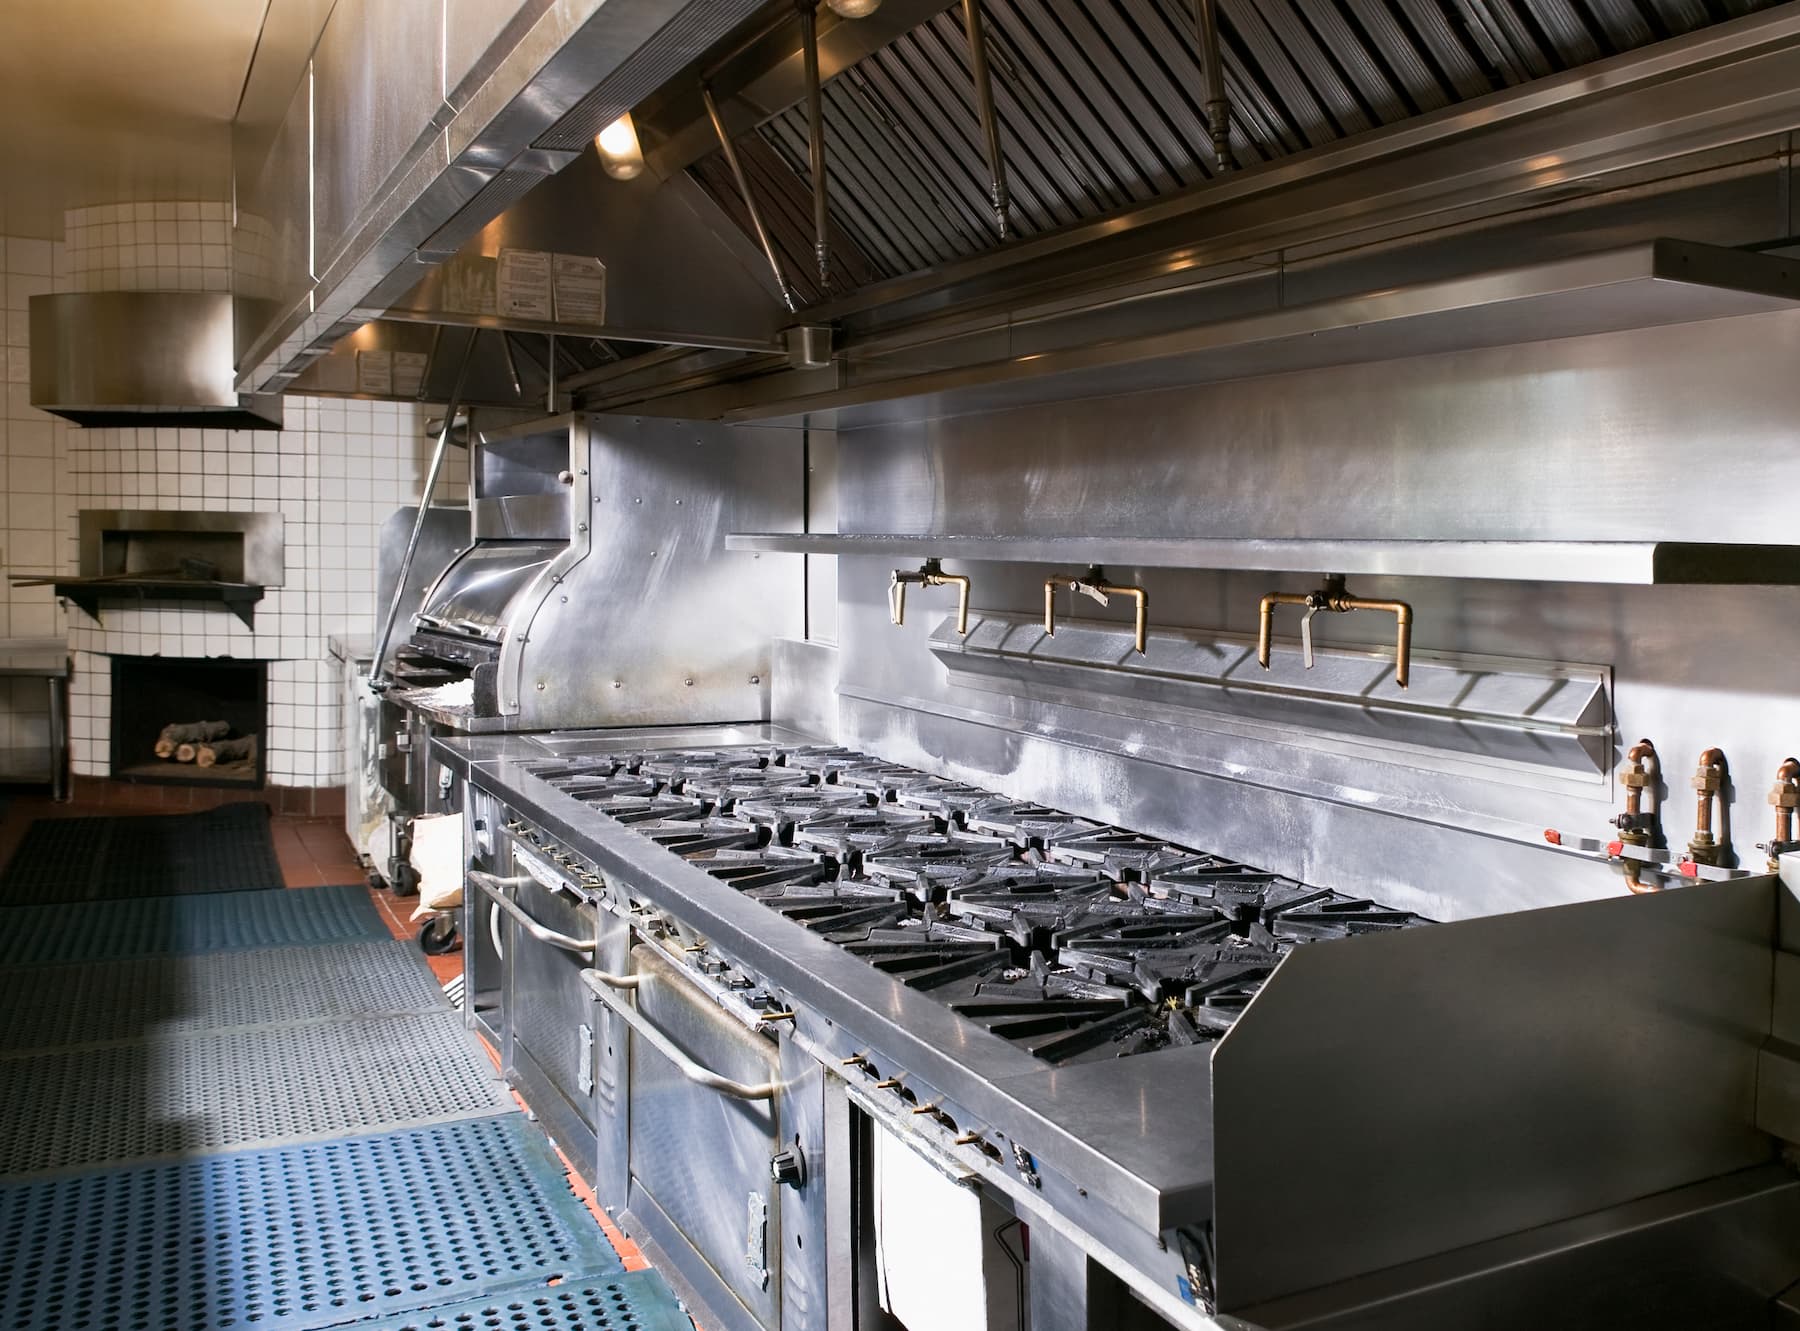 Safety Hazards in the Kitchen - What to Look Out for in a Commercial Kitchen